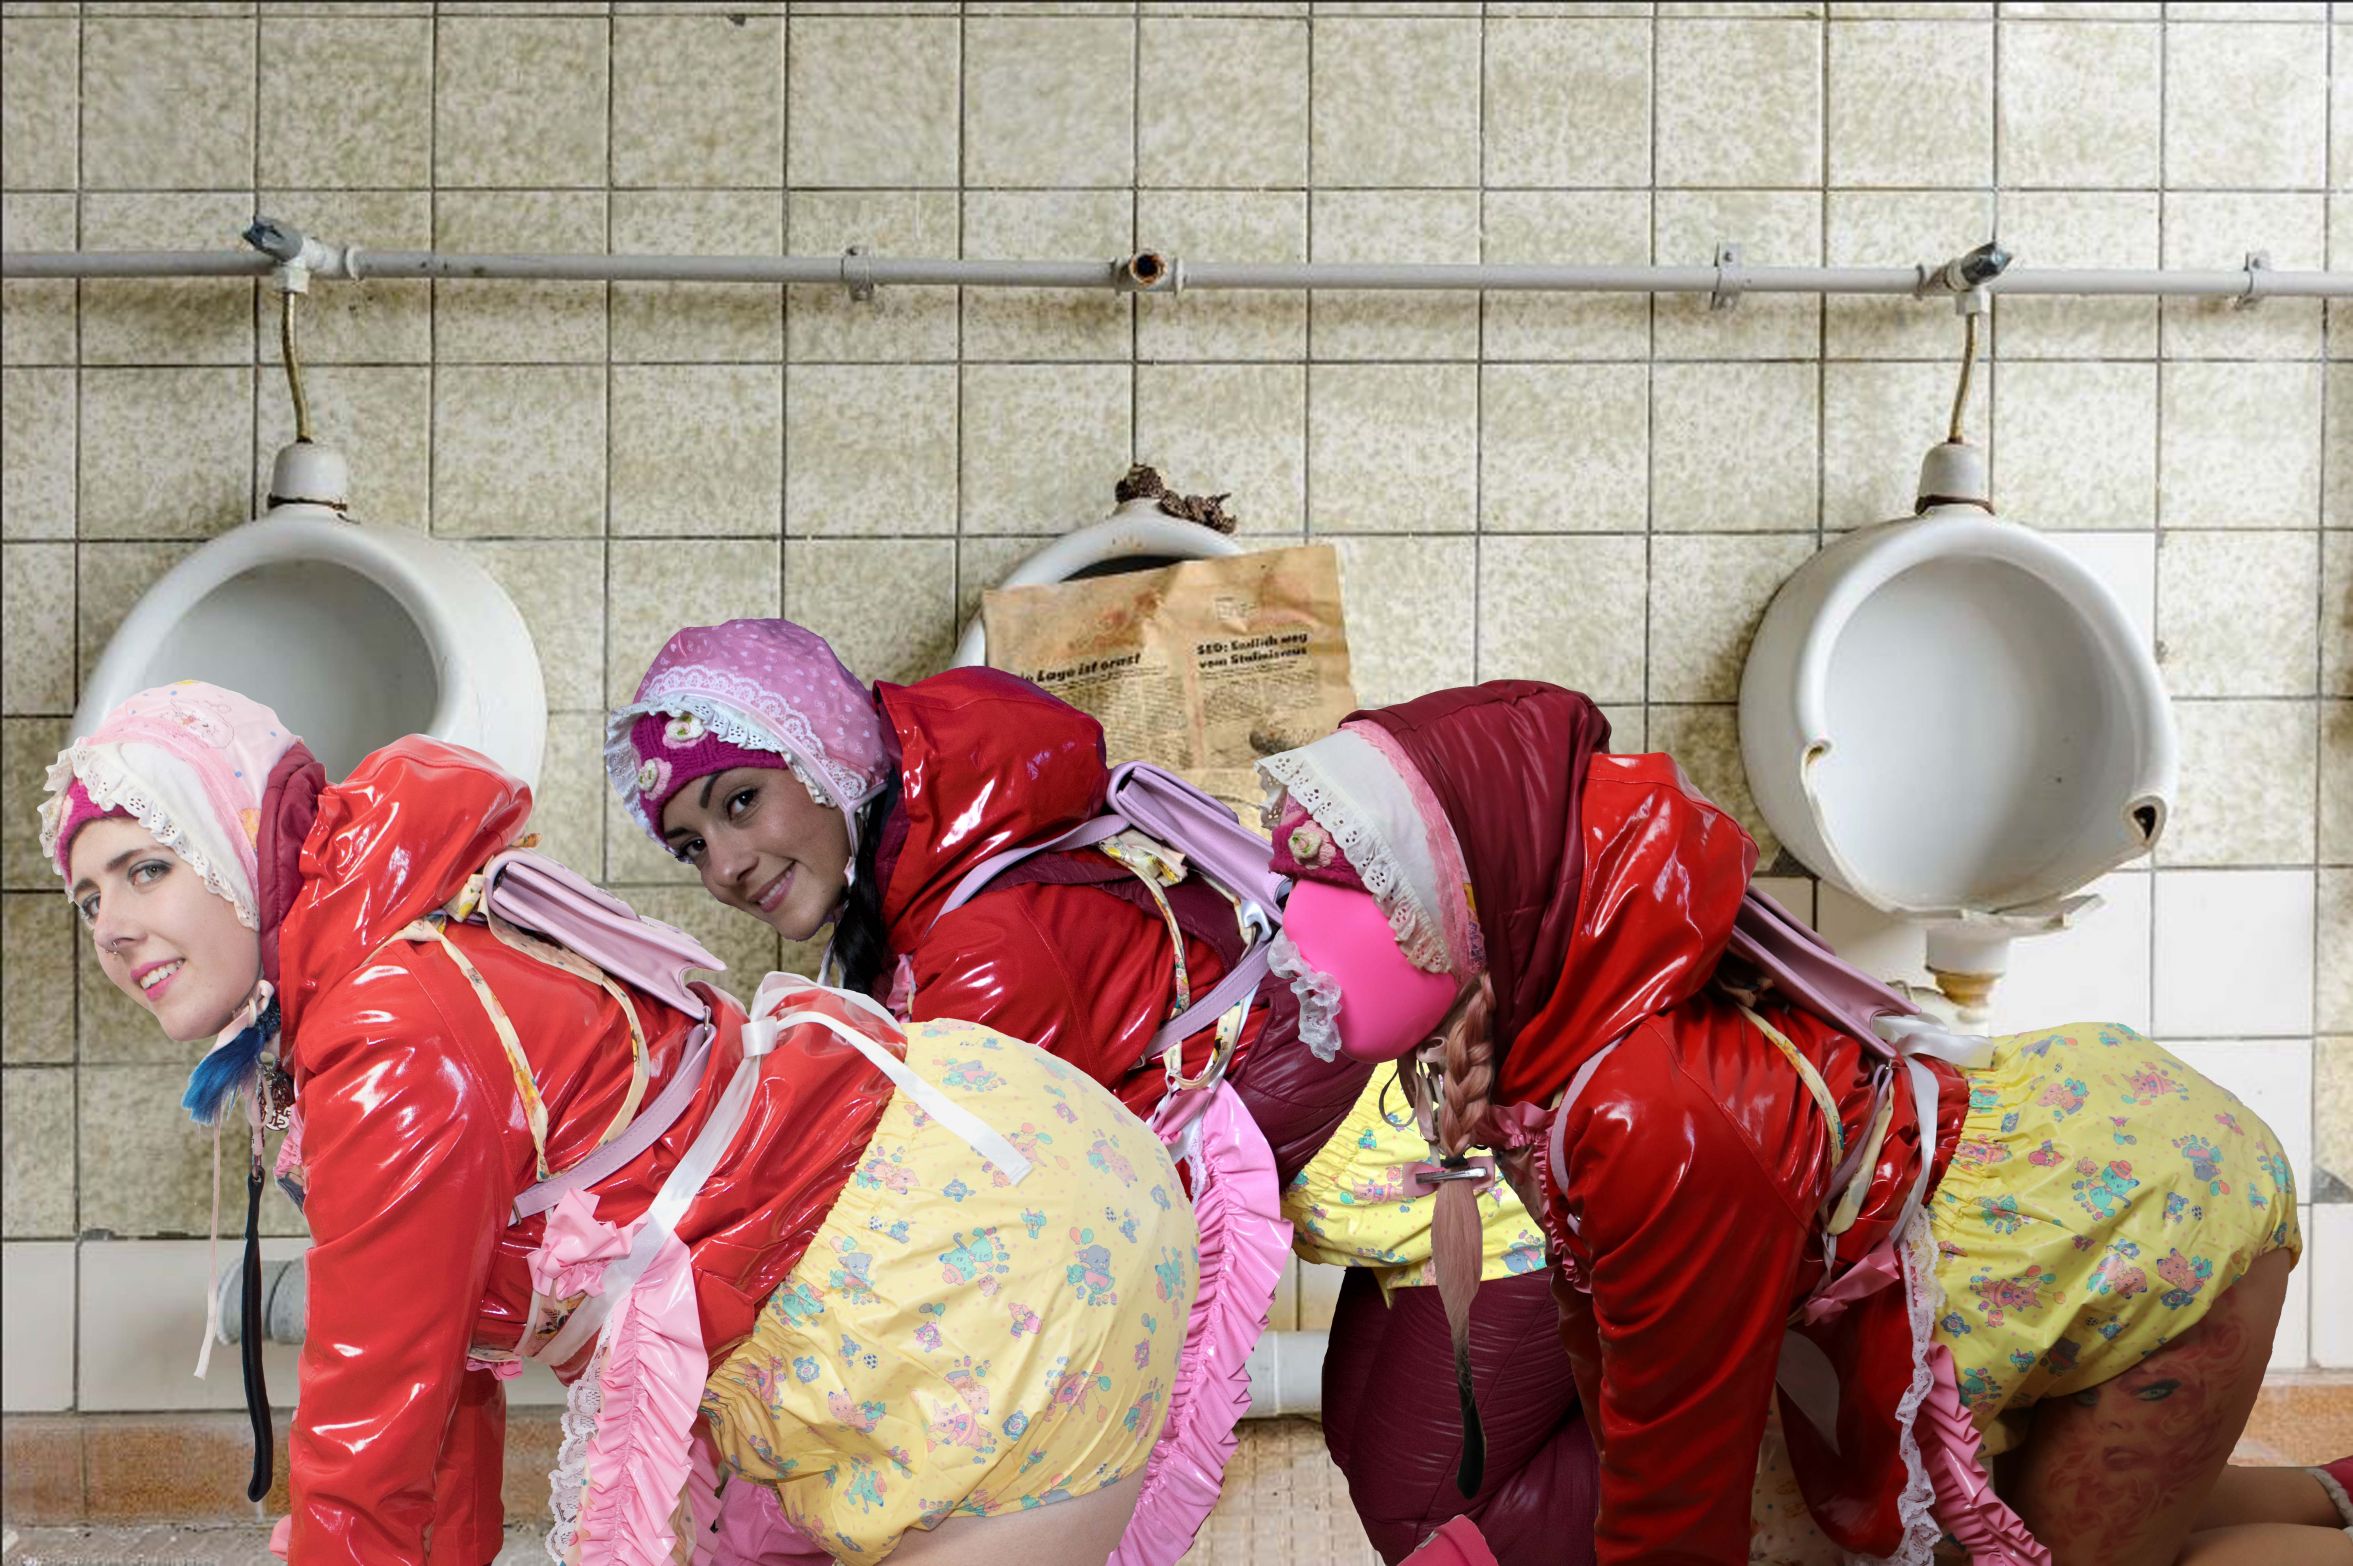 High Quality Pimp Hassans Toilet piglets waiting for users Blank Meme Template